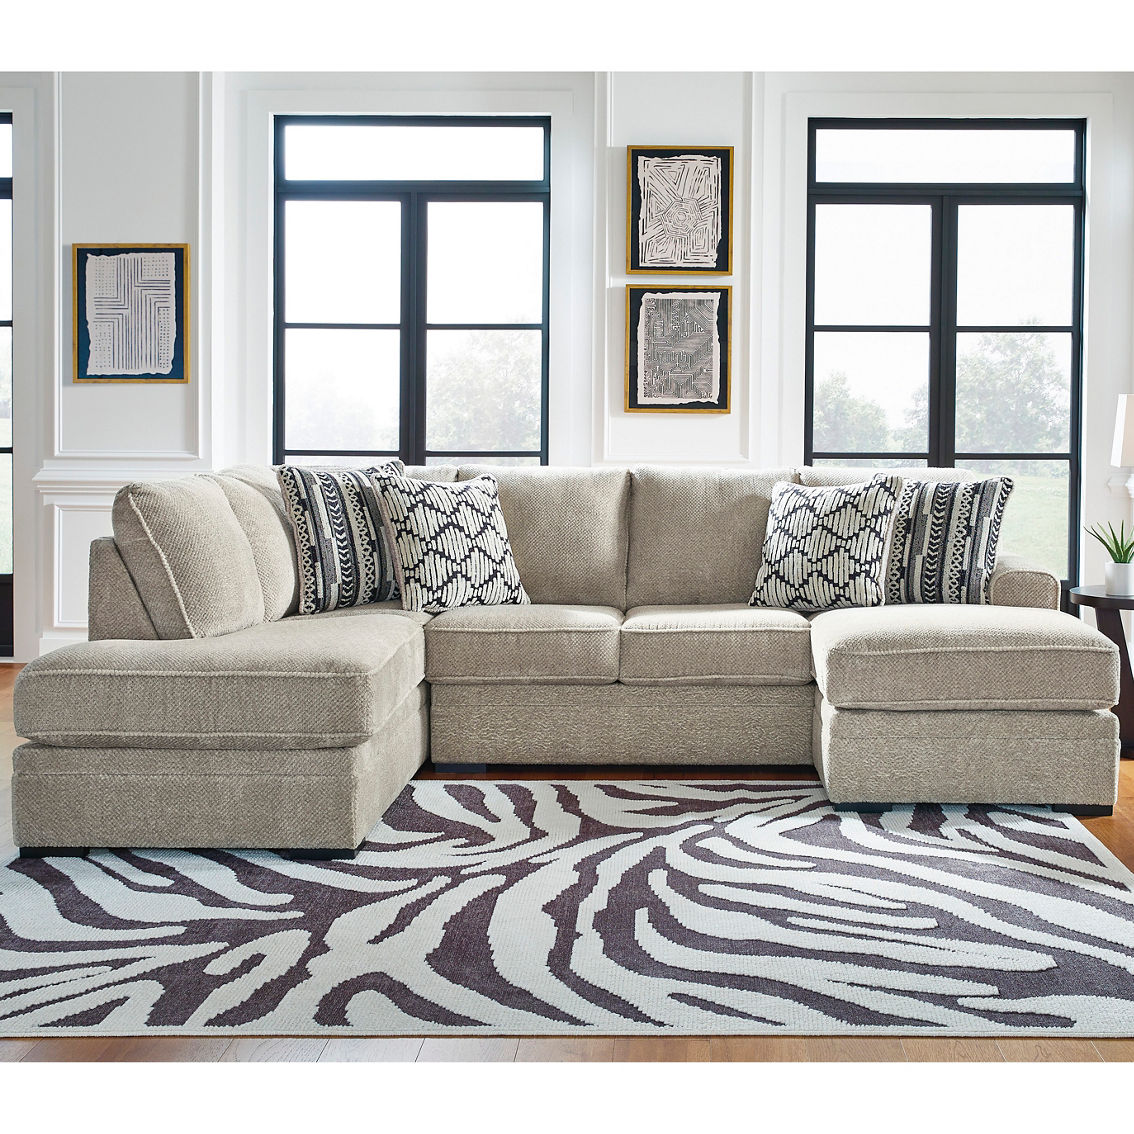 Benchcraft by Ashley Calnita Sectional with Chaise 2 pc. Set - Image 2 of 2